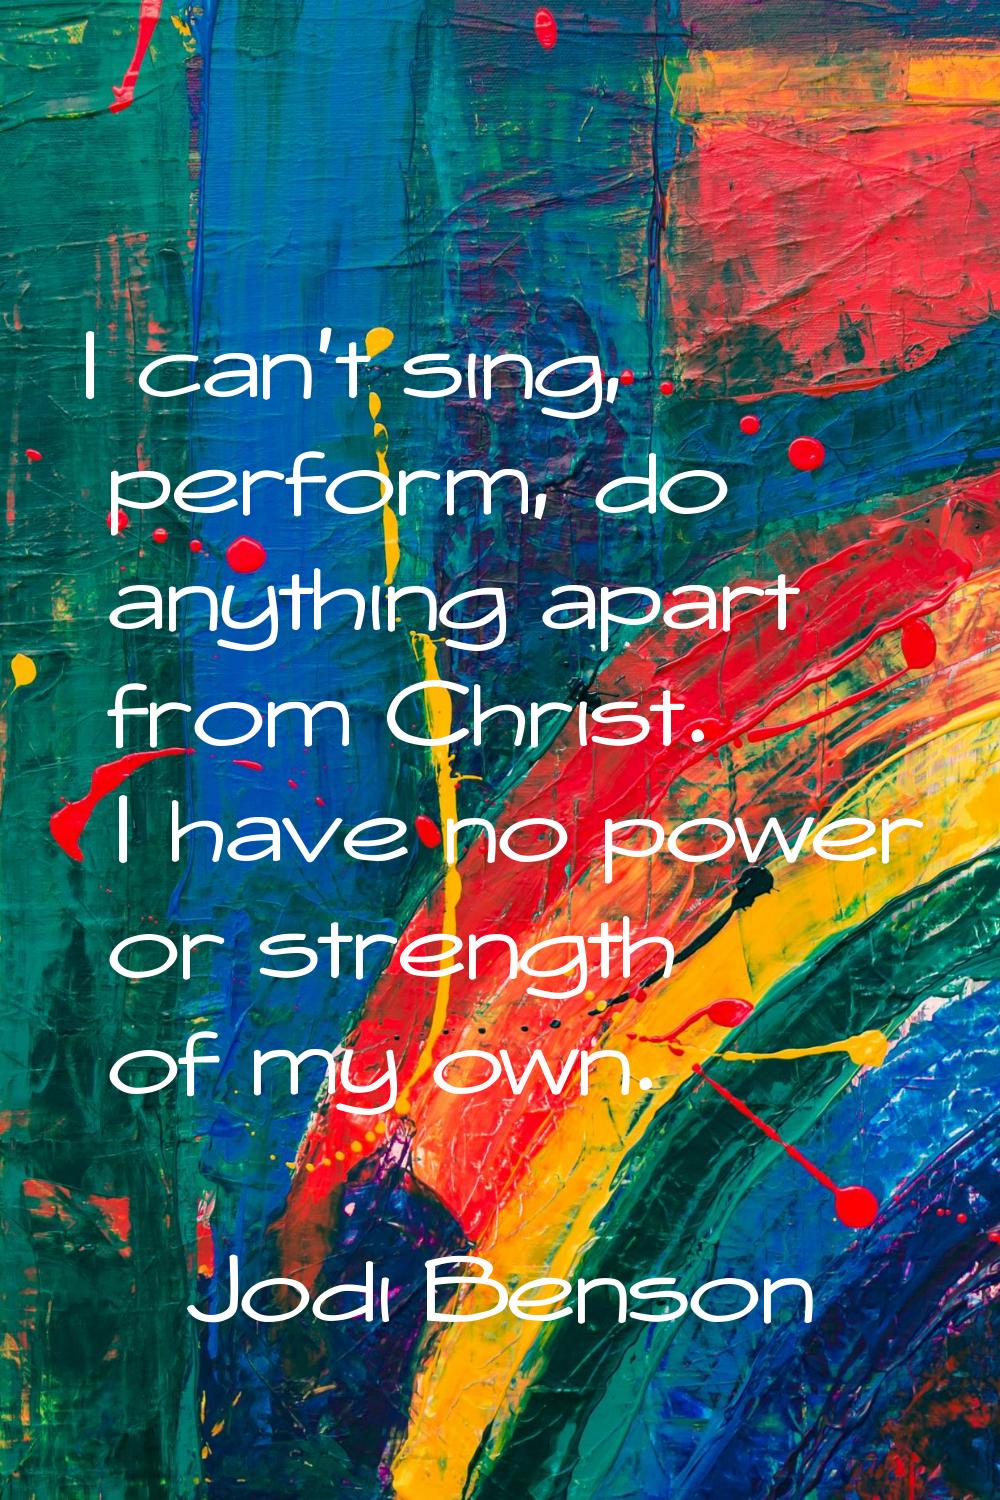 I can't sing, perform, do anything apart from Christ. I have no power or strength of my own.